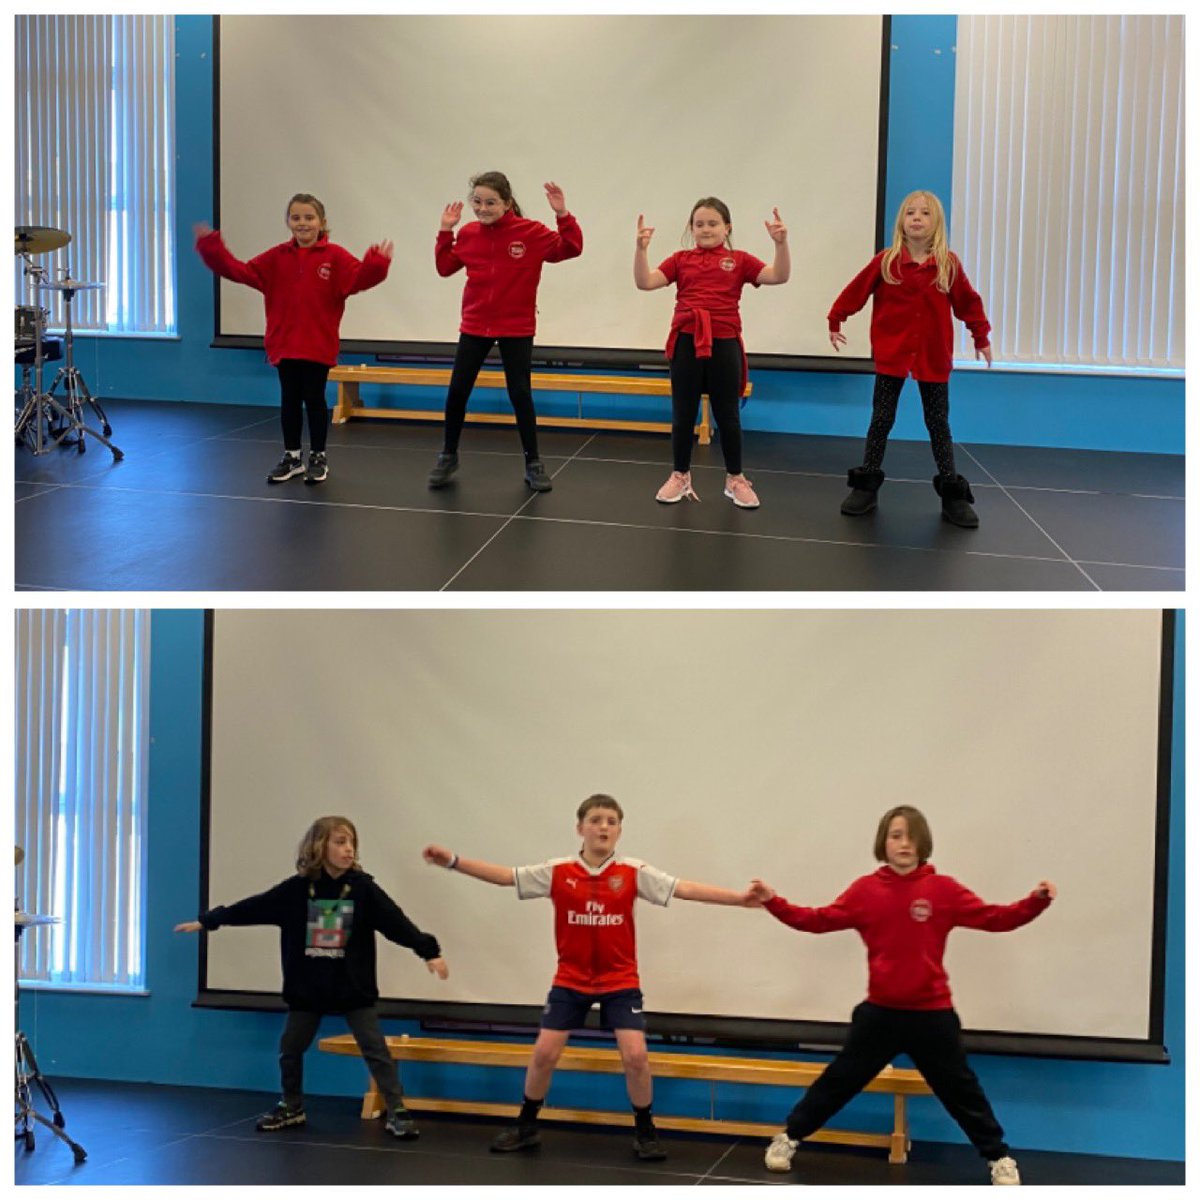 After learning African dance moves, #DosbarthMarlas put together sequences in their groups and performed in from of their classmates today! 💃 🕺 #YGTHAW #YGTEXP #YGTECC